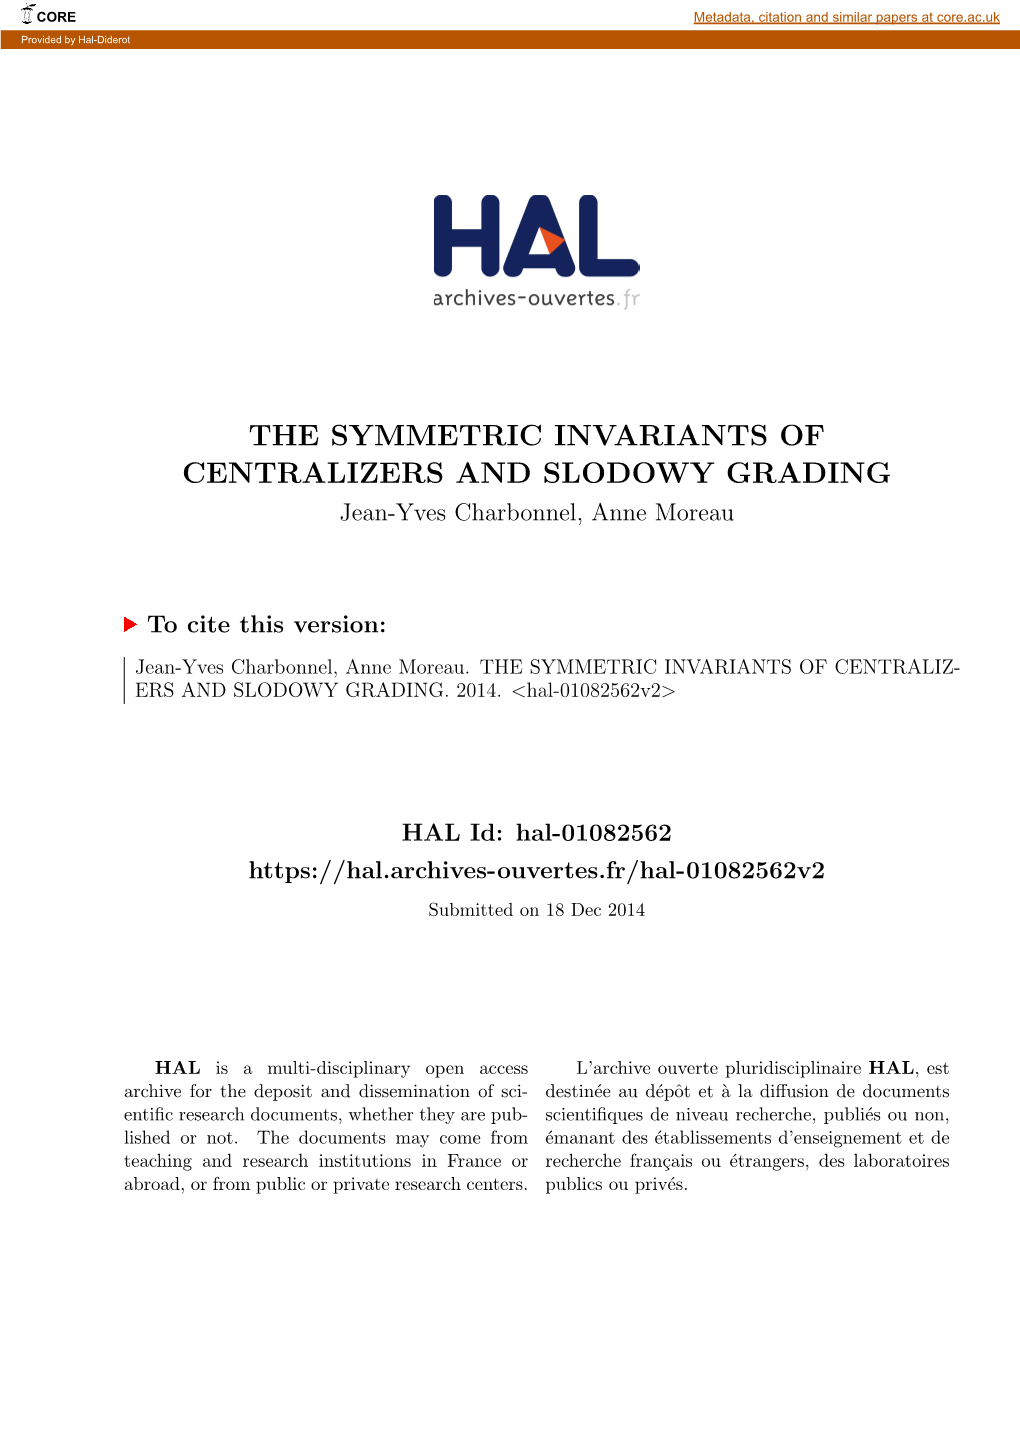 THE SYMMETRIC INVARIANTS of CENTRALIZERS and SLODOWY GRADING Jean-Yves Charbonnel, Anne Moreau